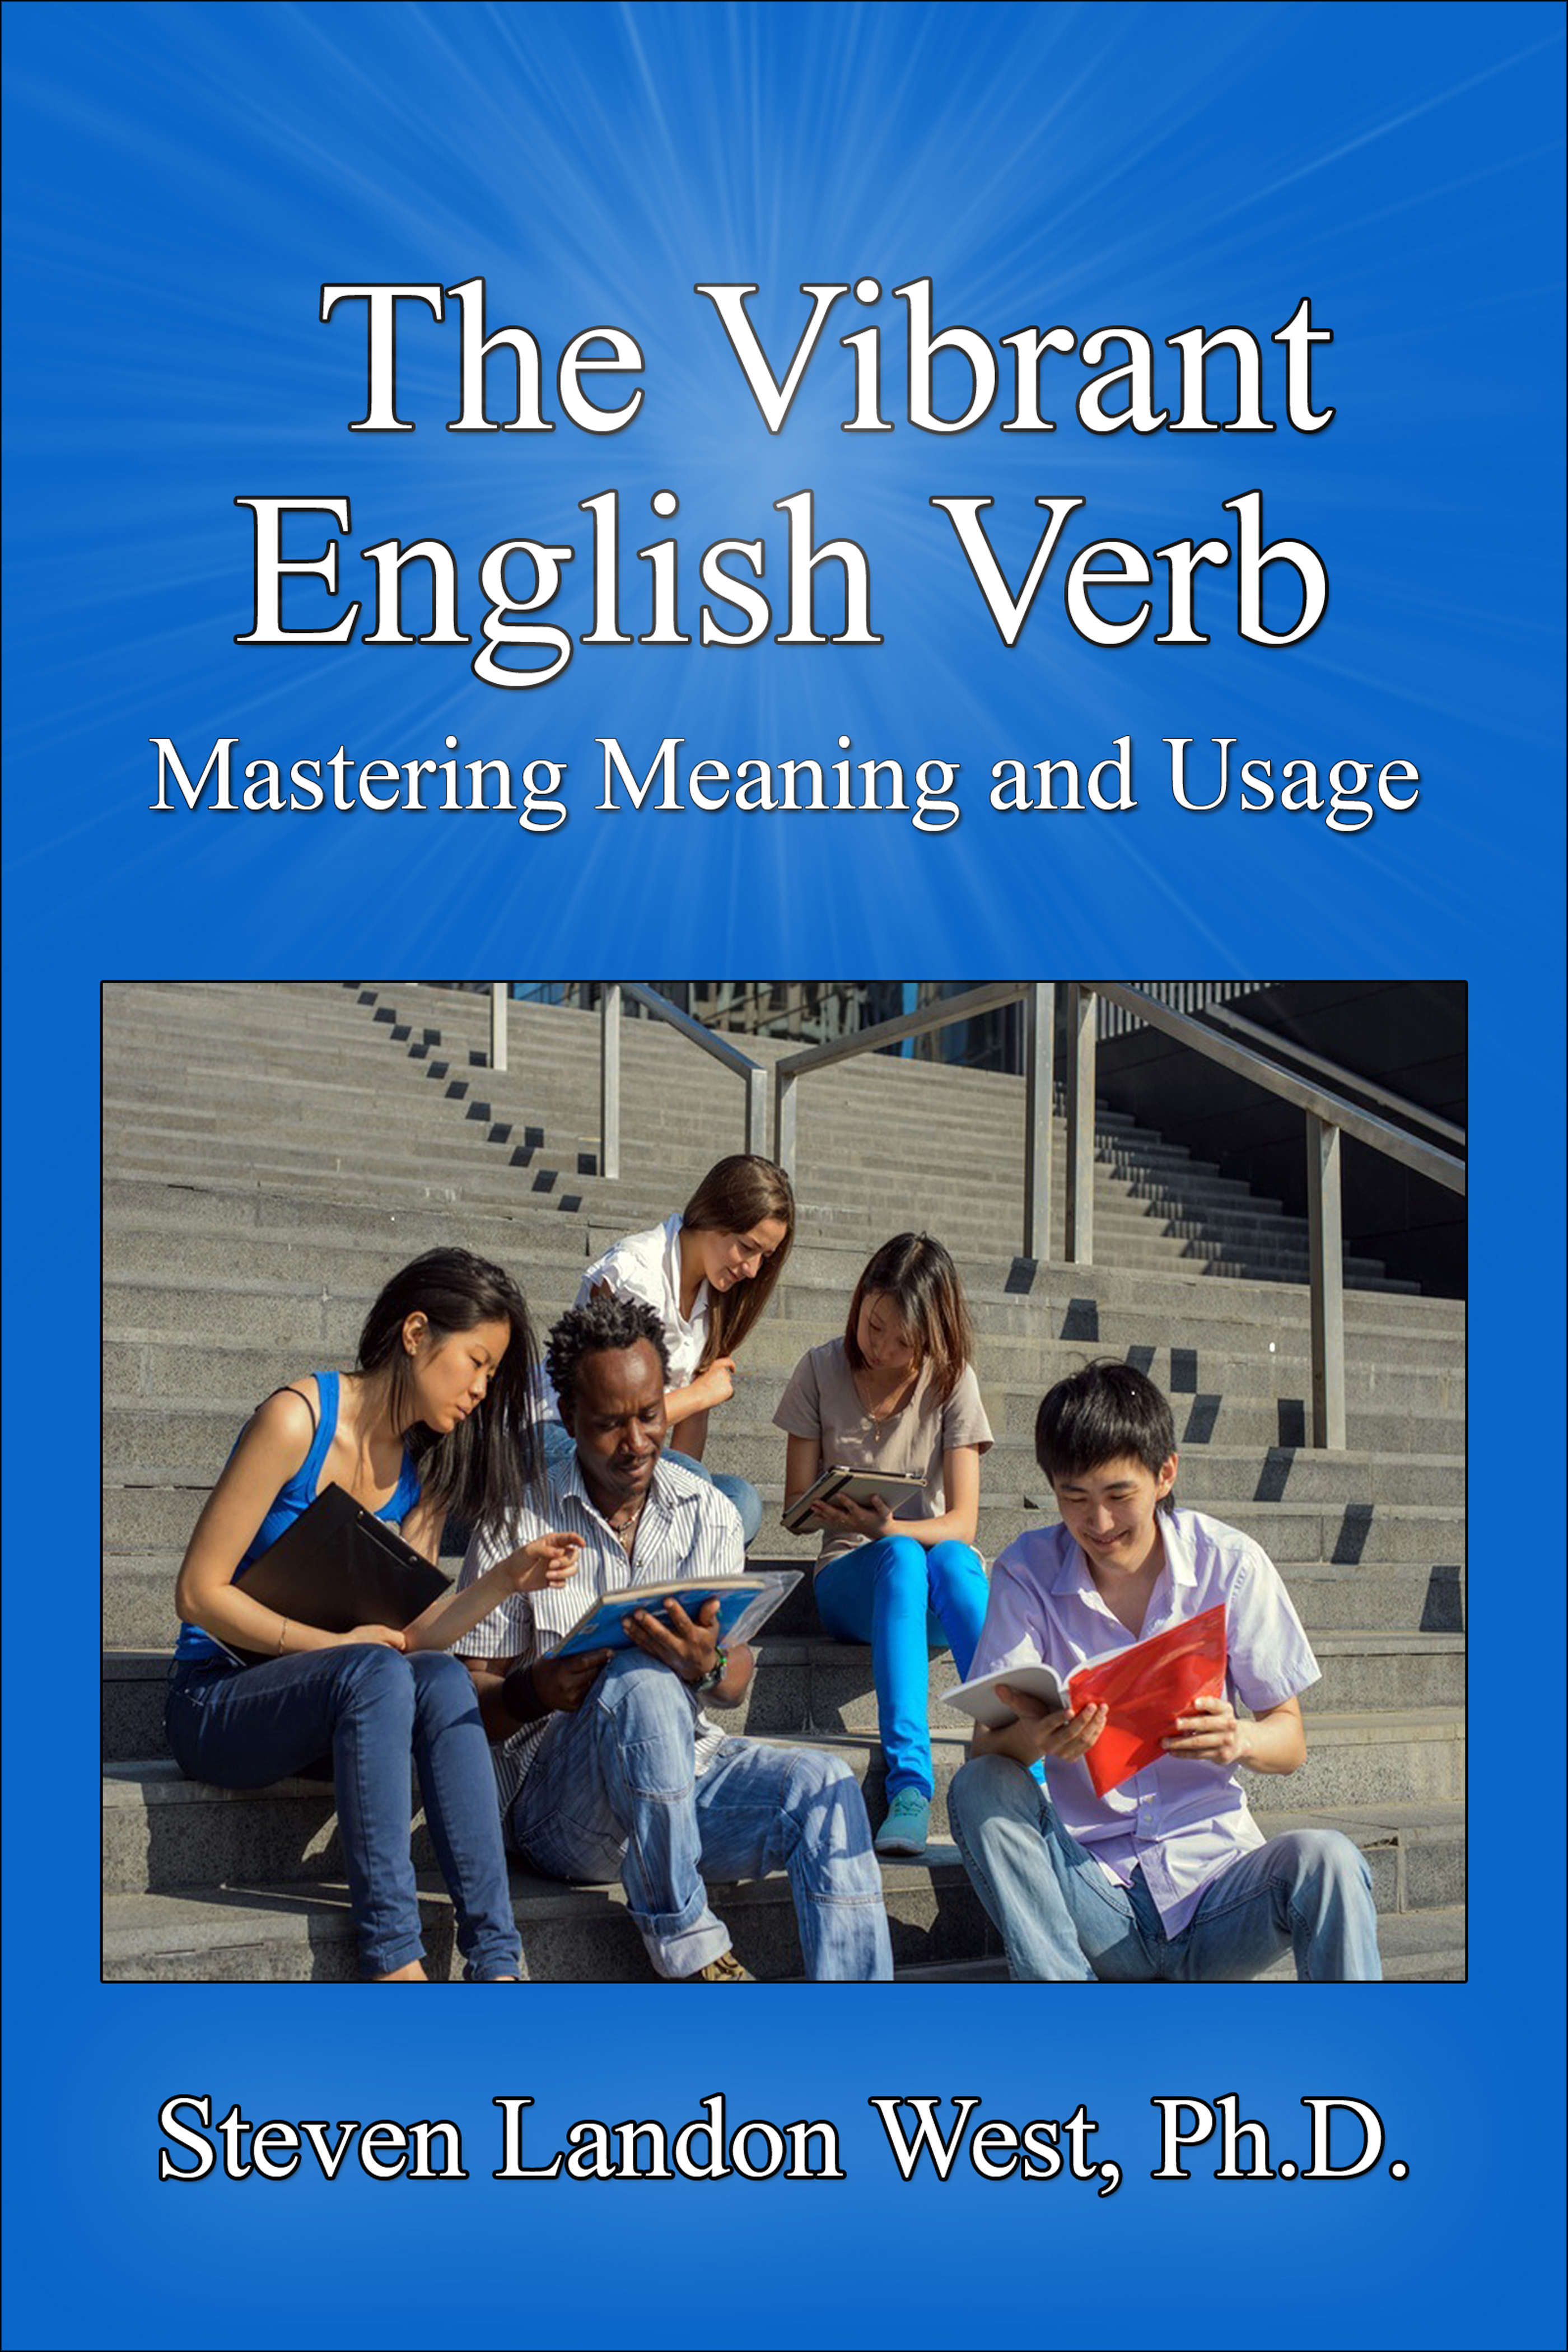 The Vibrant English Verb: Mastering Meaning and Usage